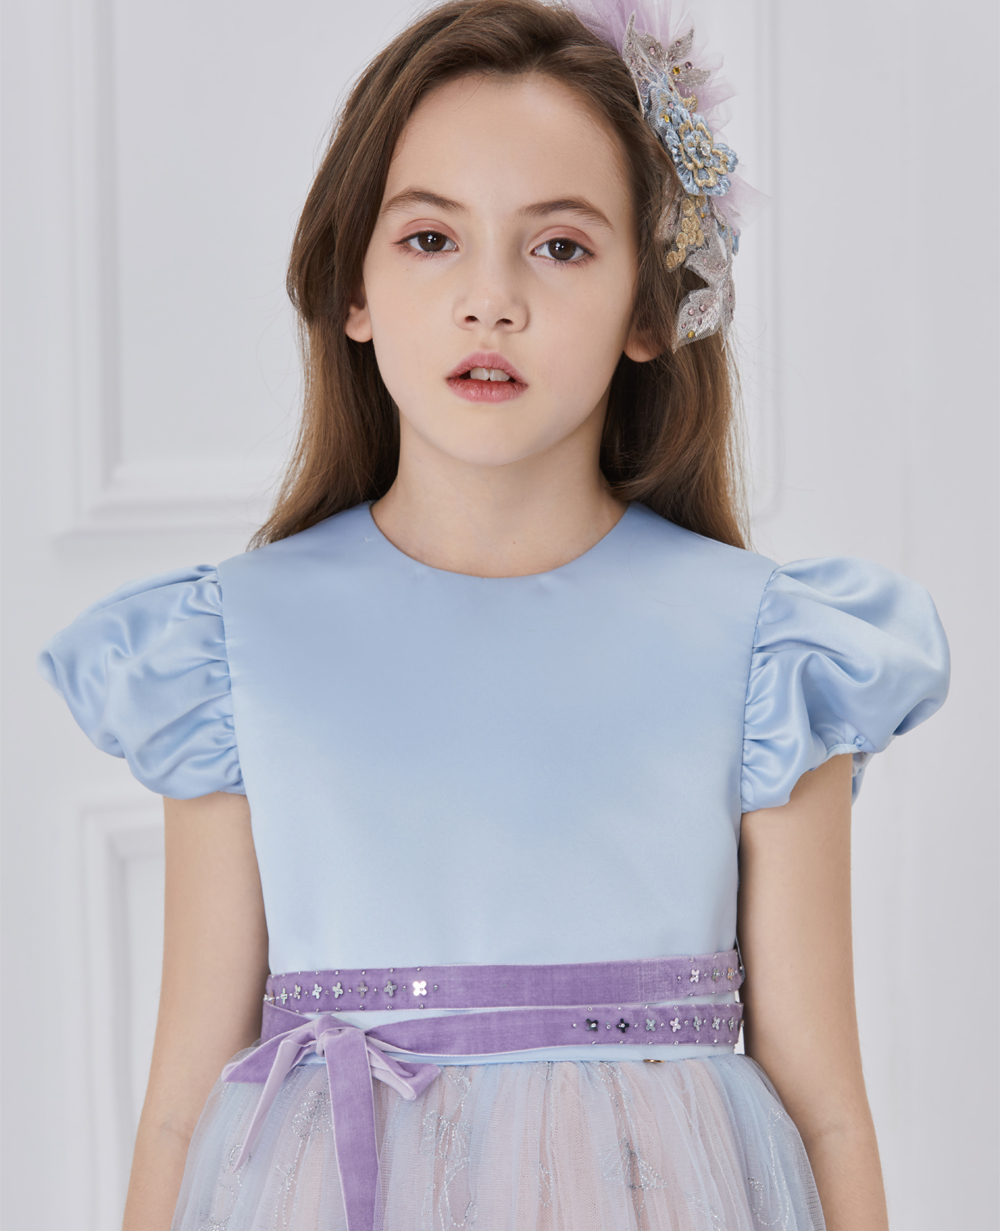 Blue and lilac capped sleeve tuelle dress